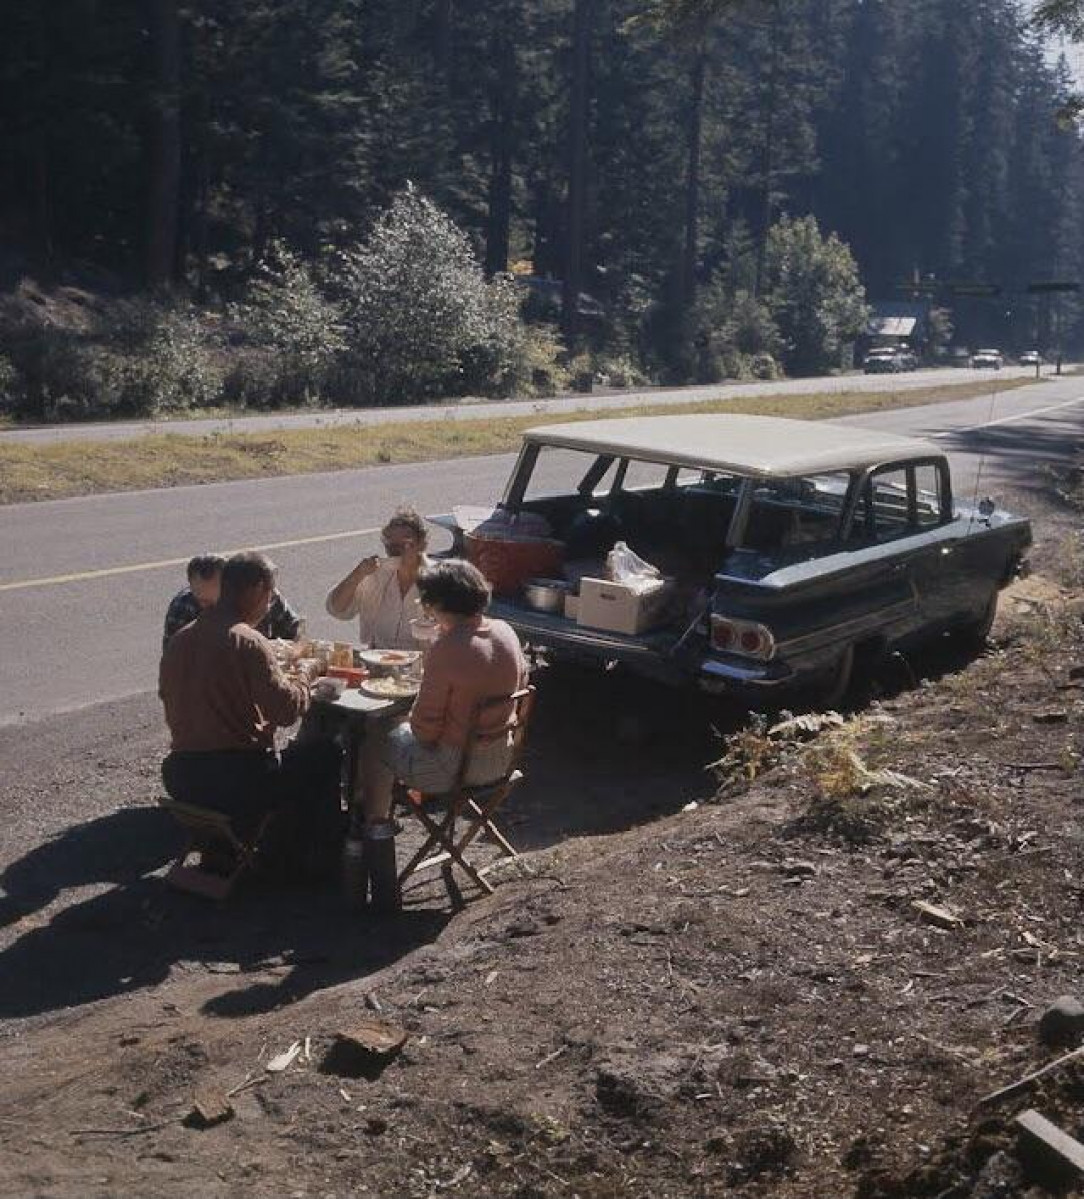 In the days before fast-food, roadside picnics were the highlight of every road trip (pic from 1958 family vacation)